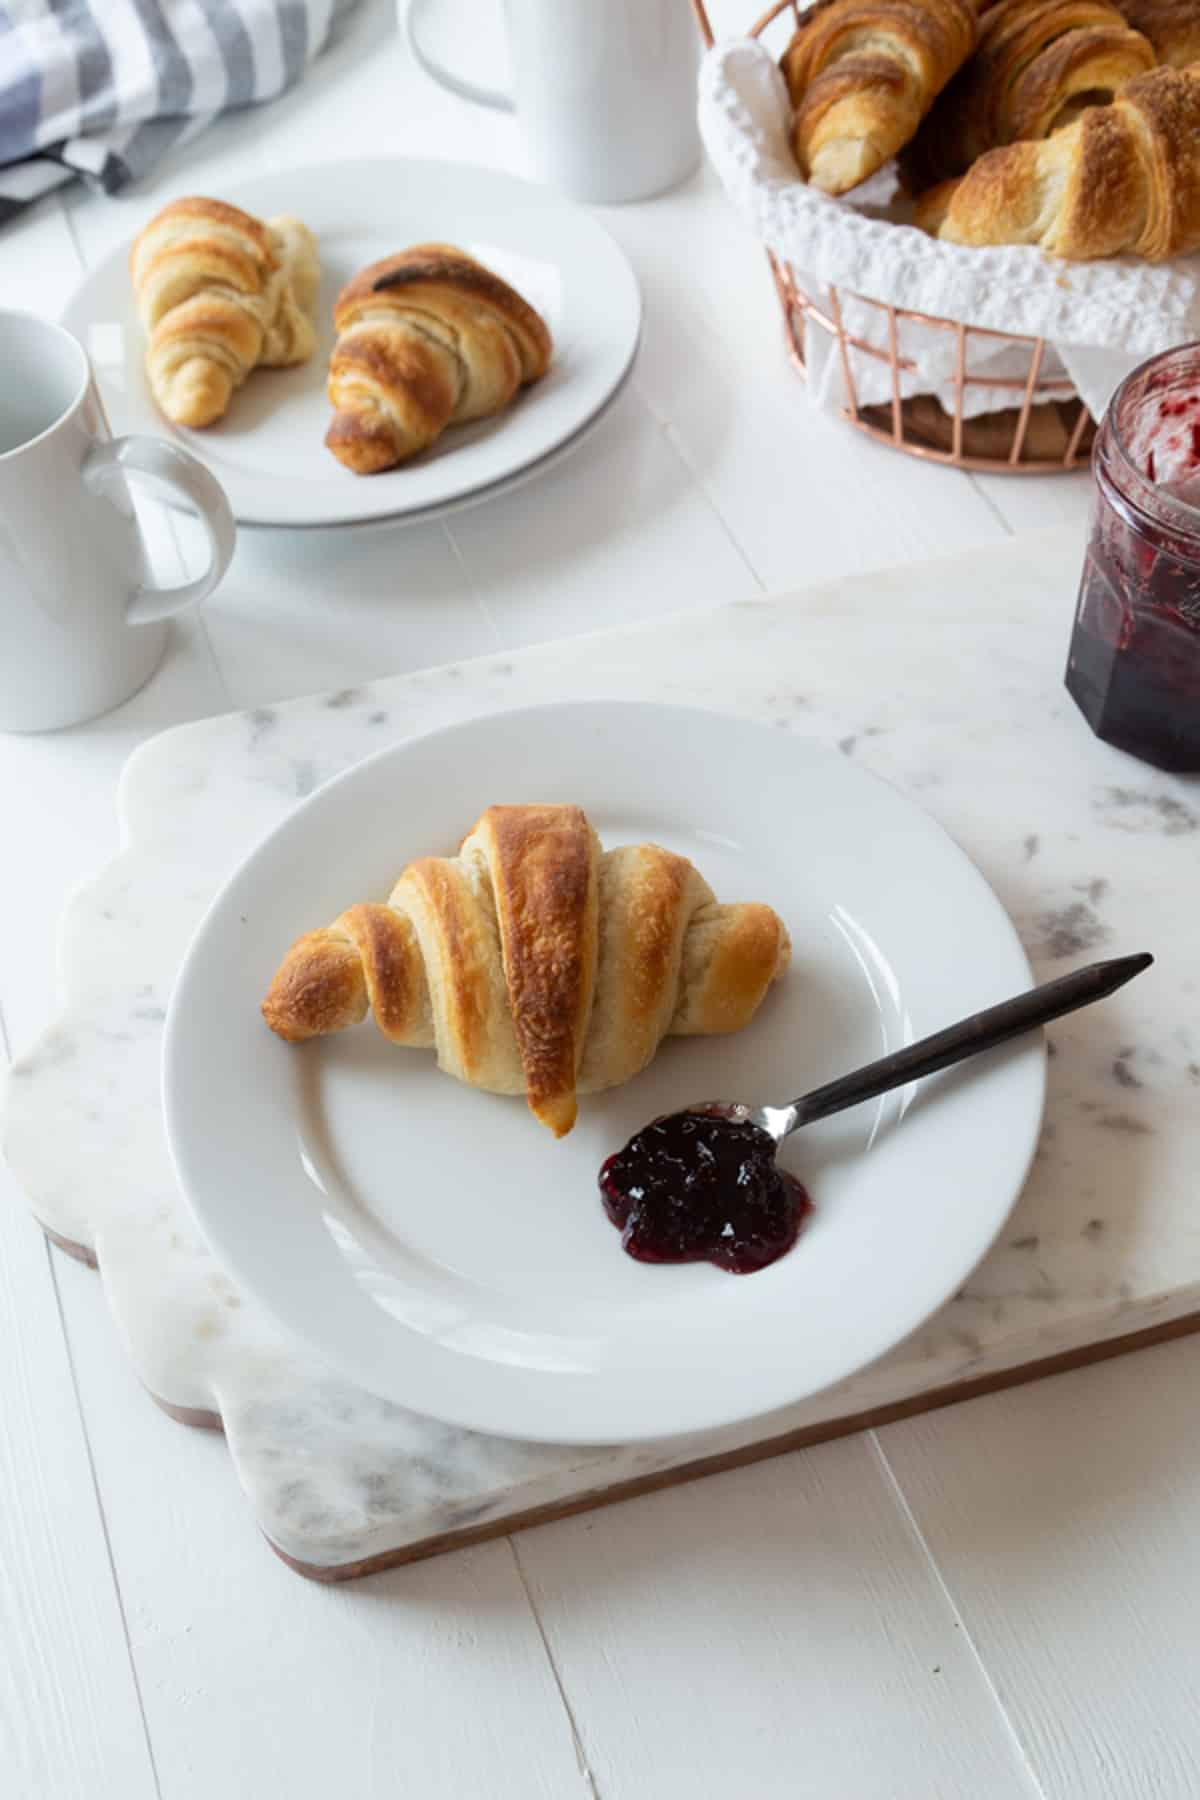 A plate with a croissant and jam and a basket of croissants in the background.